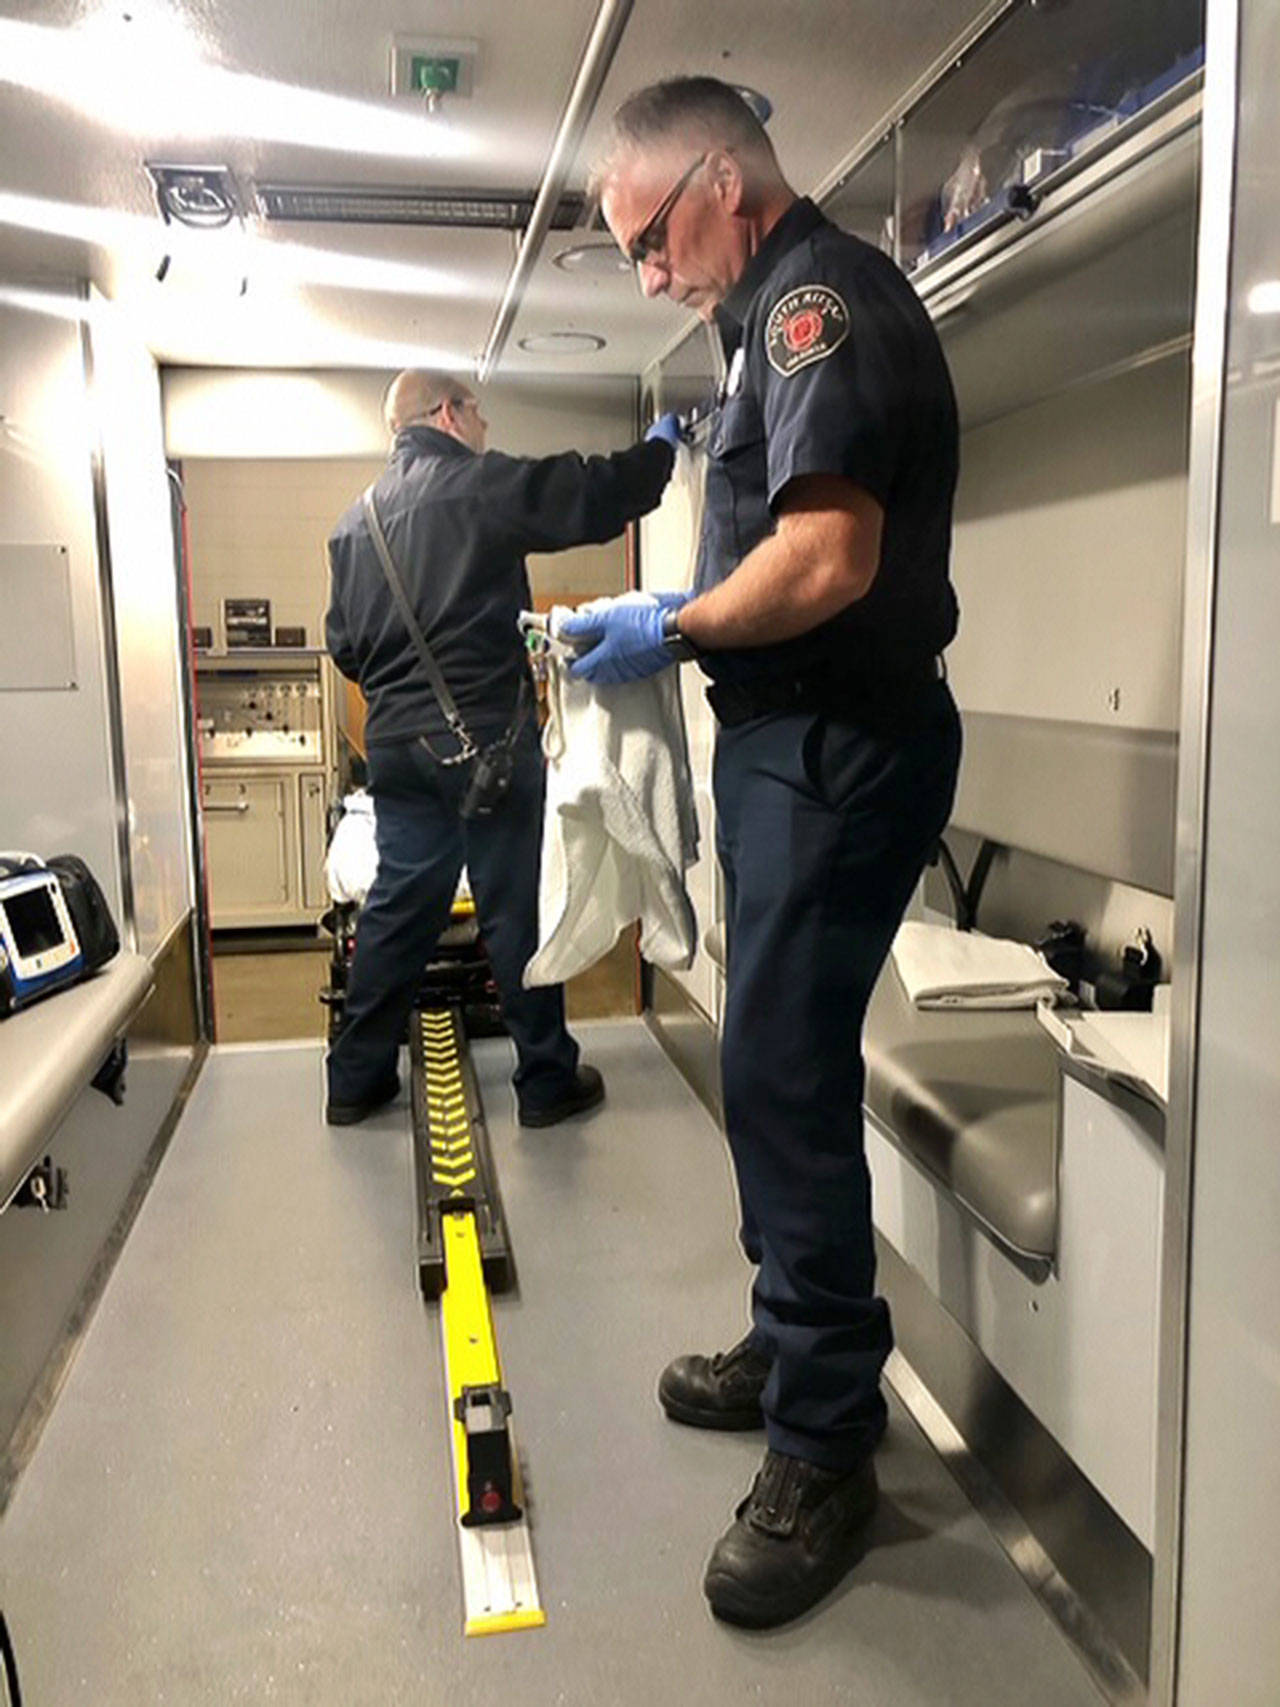 Brian Dyste, a 25-year veteran firefighter and paramedic with South Kitsap Fire and Rescue, says he is able to discuss his COVID-19 concerns with his wife, who is an emergency-room nurse. (Courtesy photo)